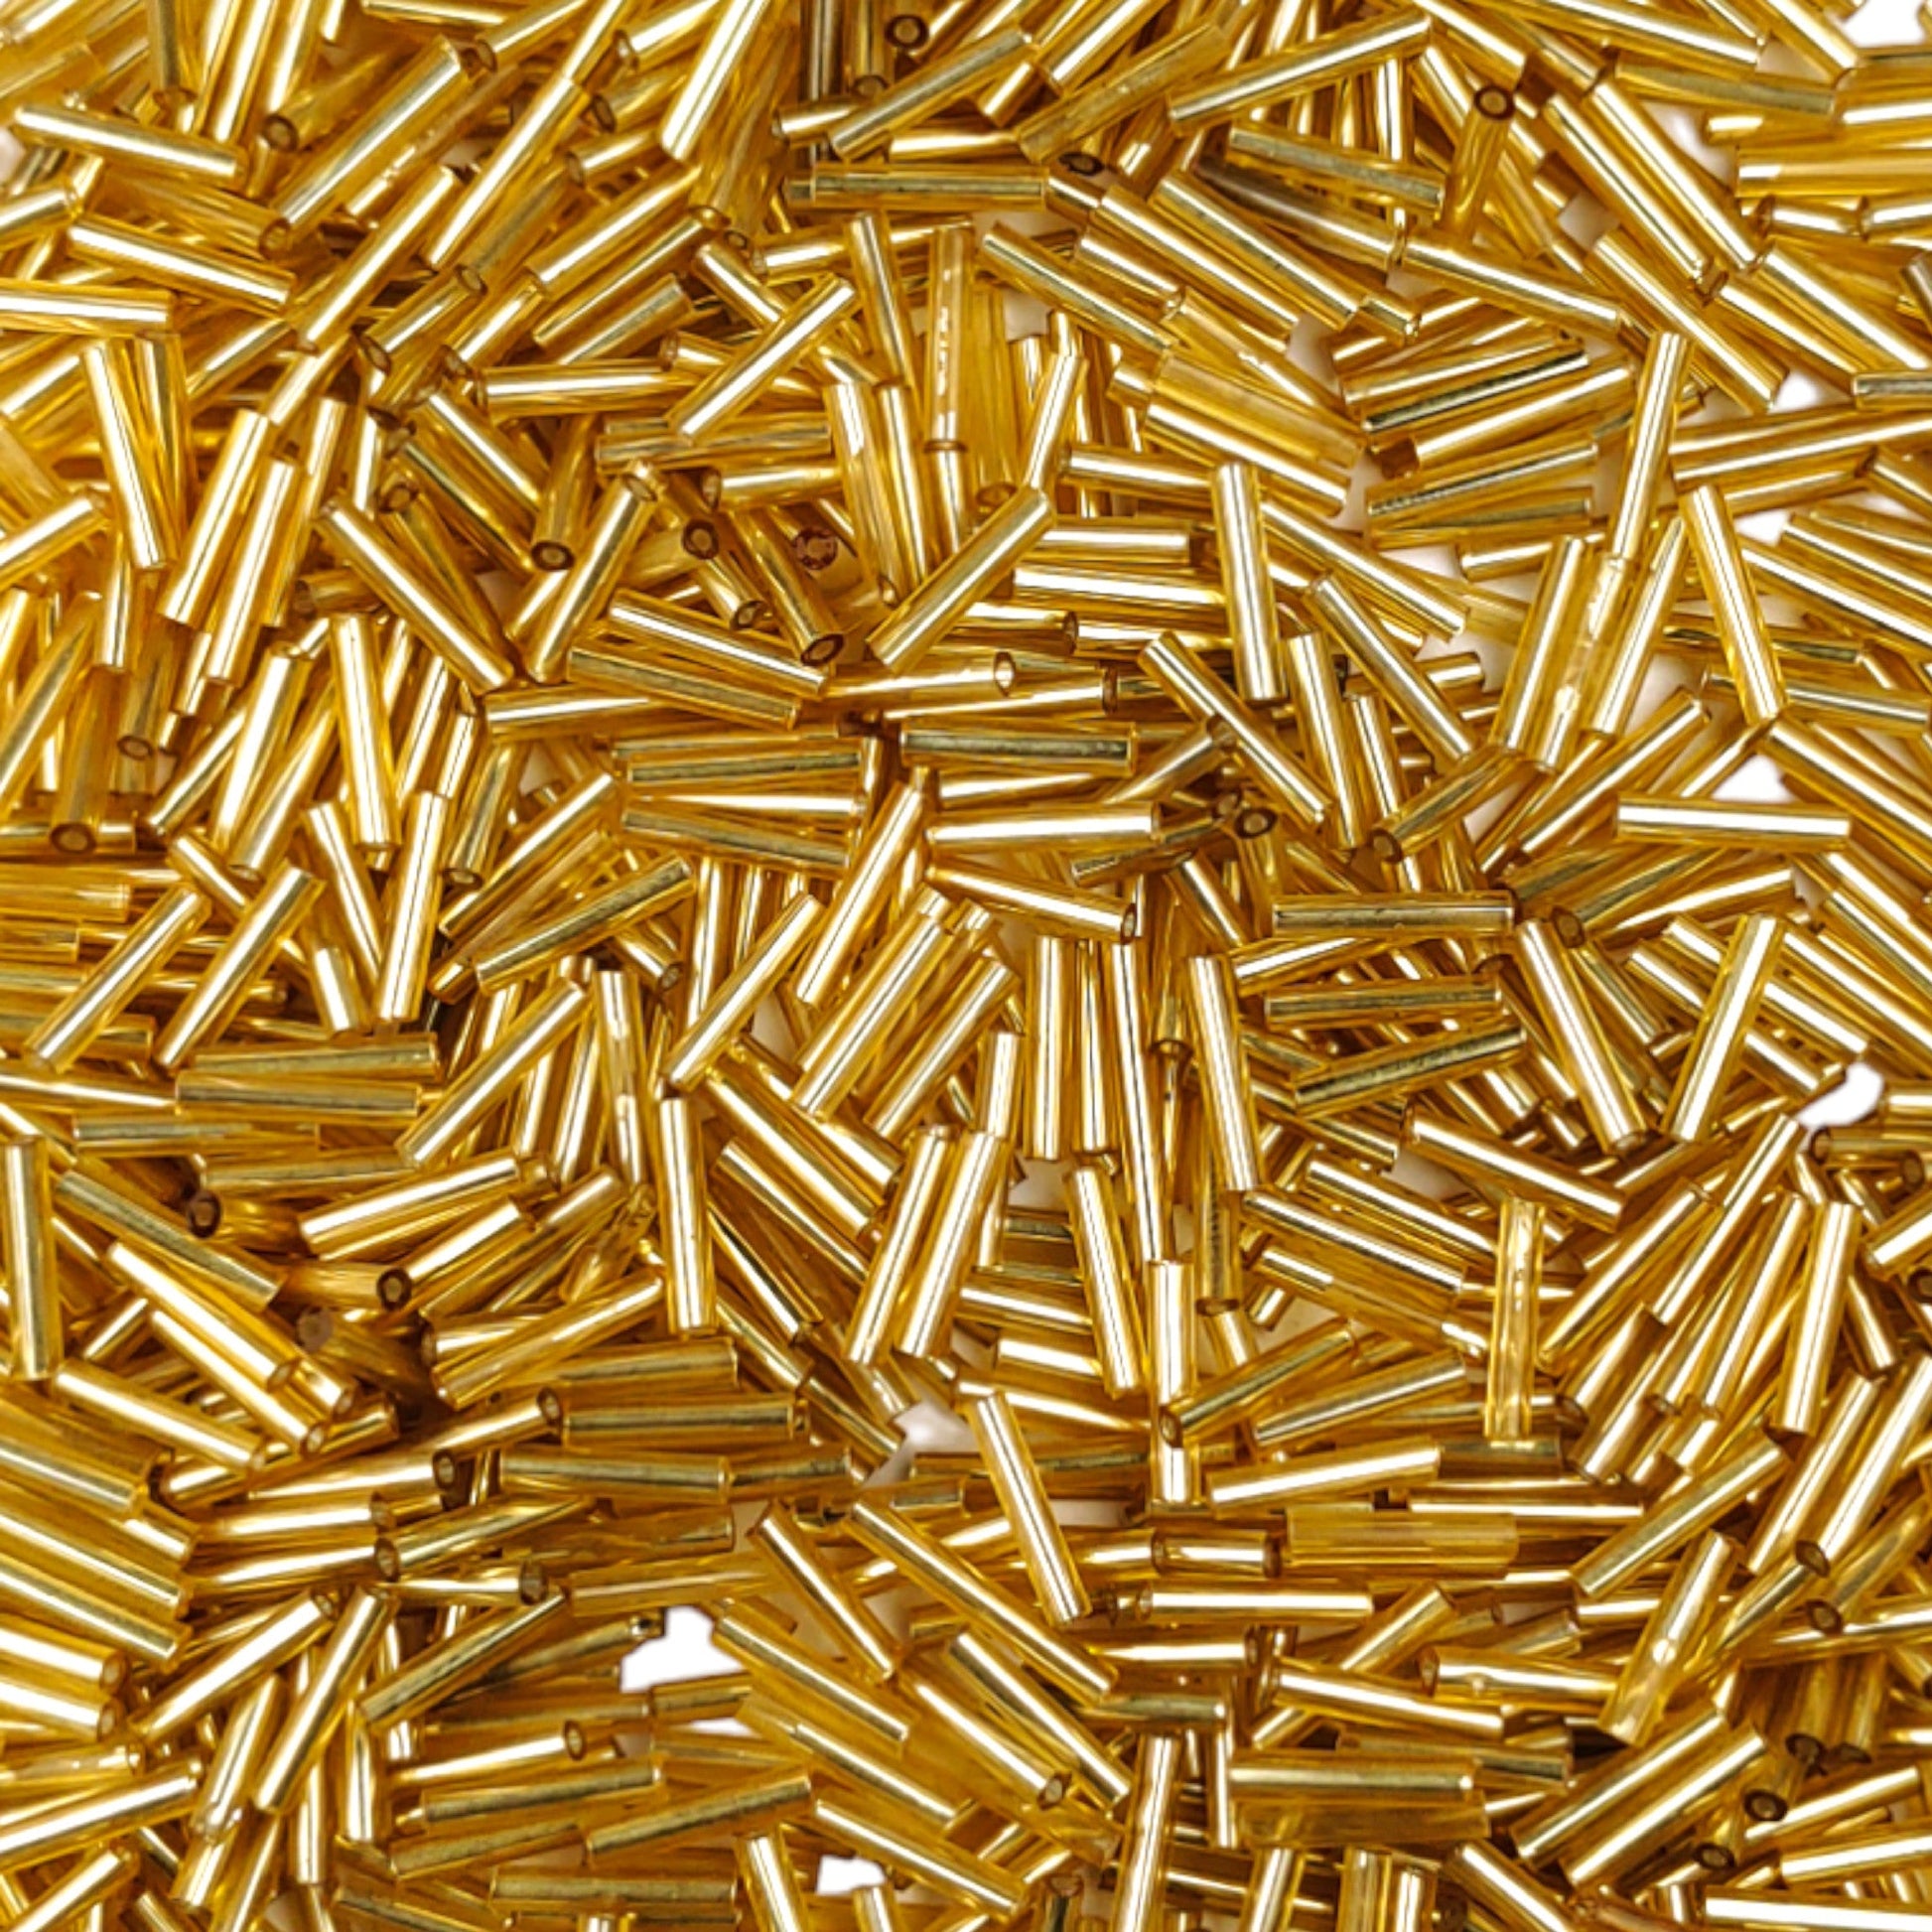 Shiny Hollow Cylindrical Golden Colored Cheed Beads for Craft or Decoration